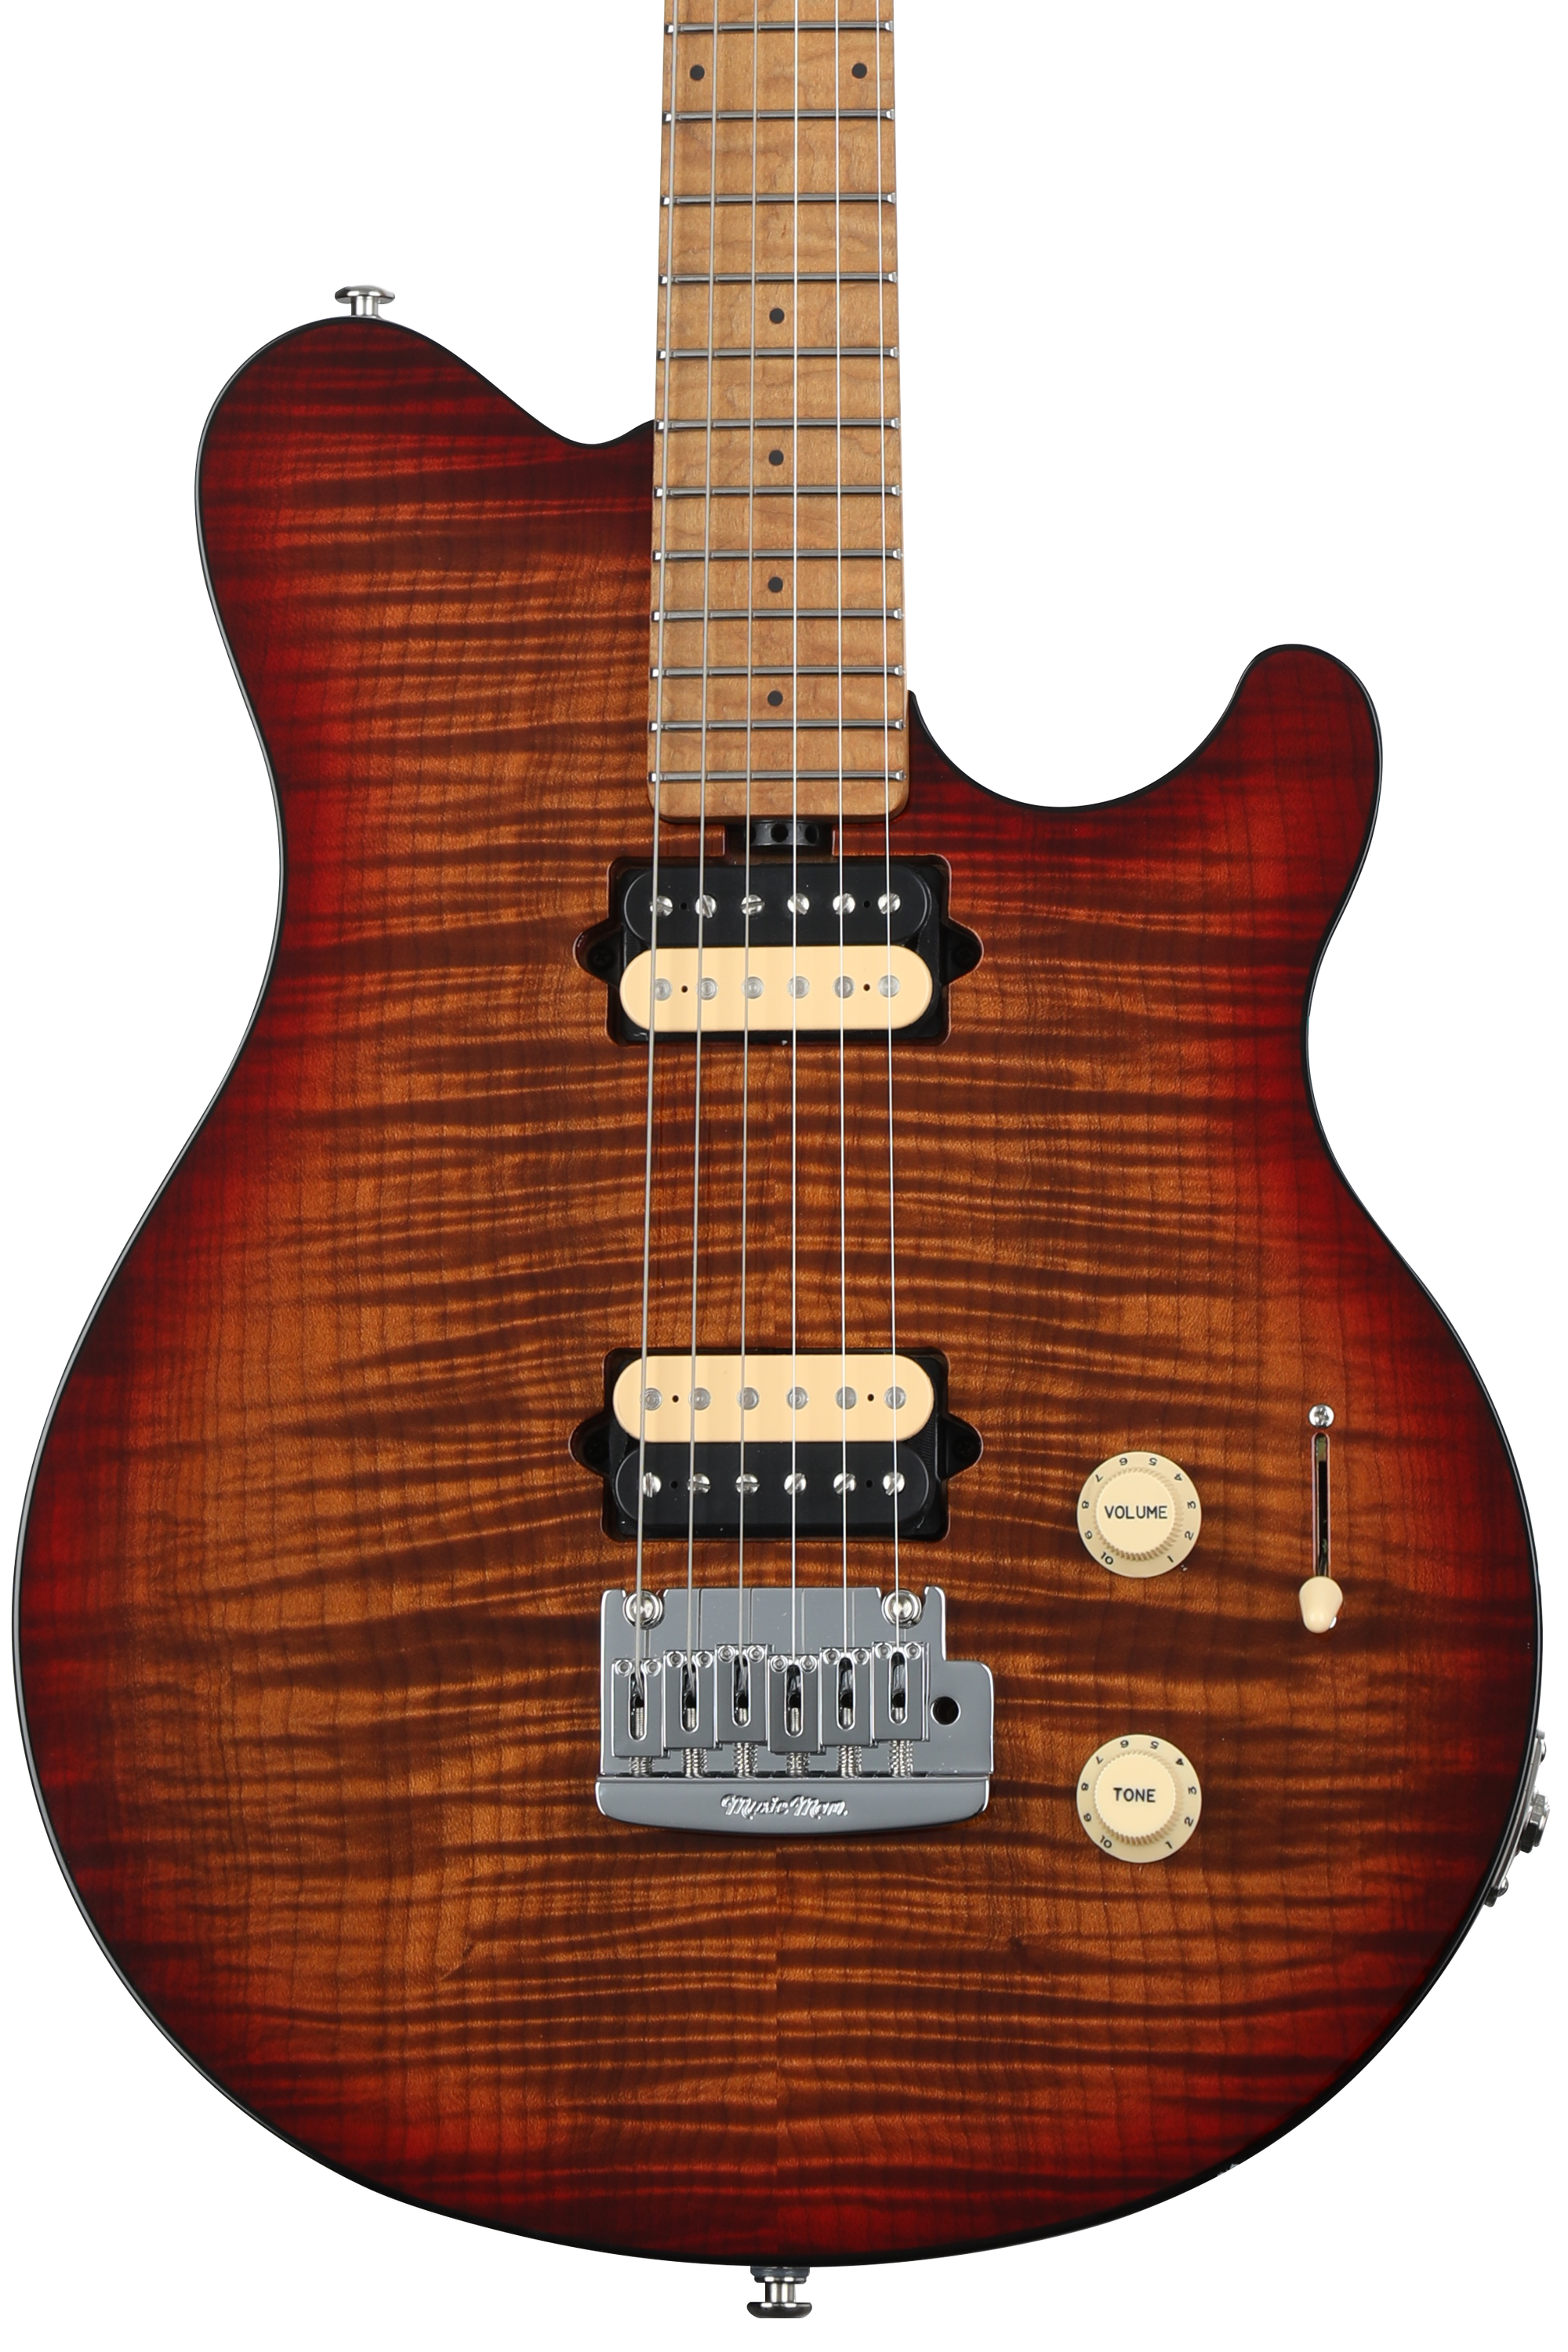 Ernie Ball Music Man Axis Super Sport Electric Guitar - Roasted Amber Flame  with Roasted Figured Maple Fingerboard